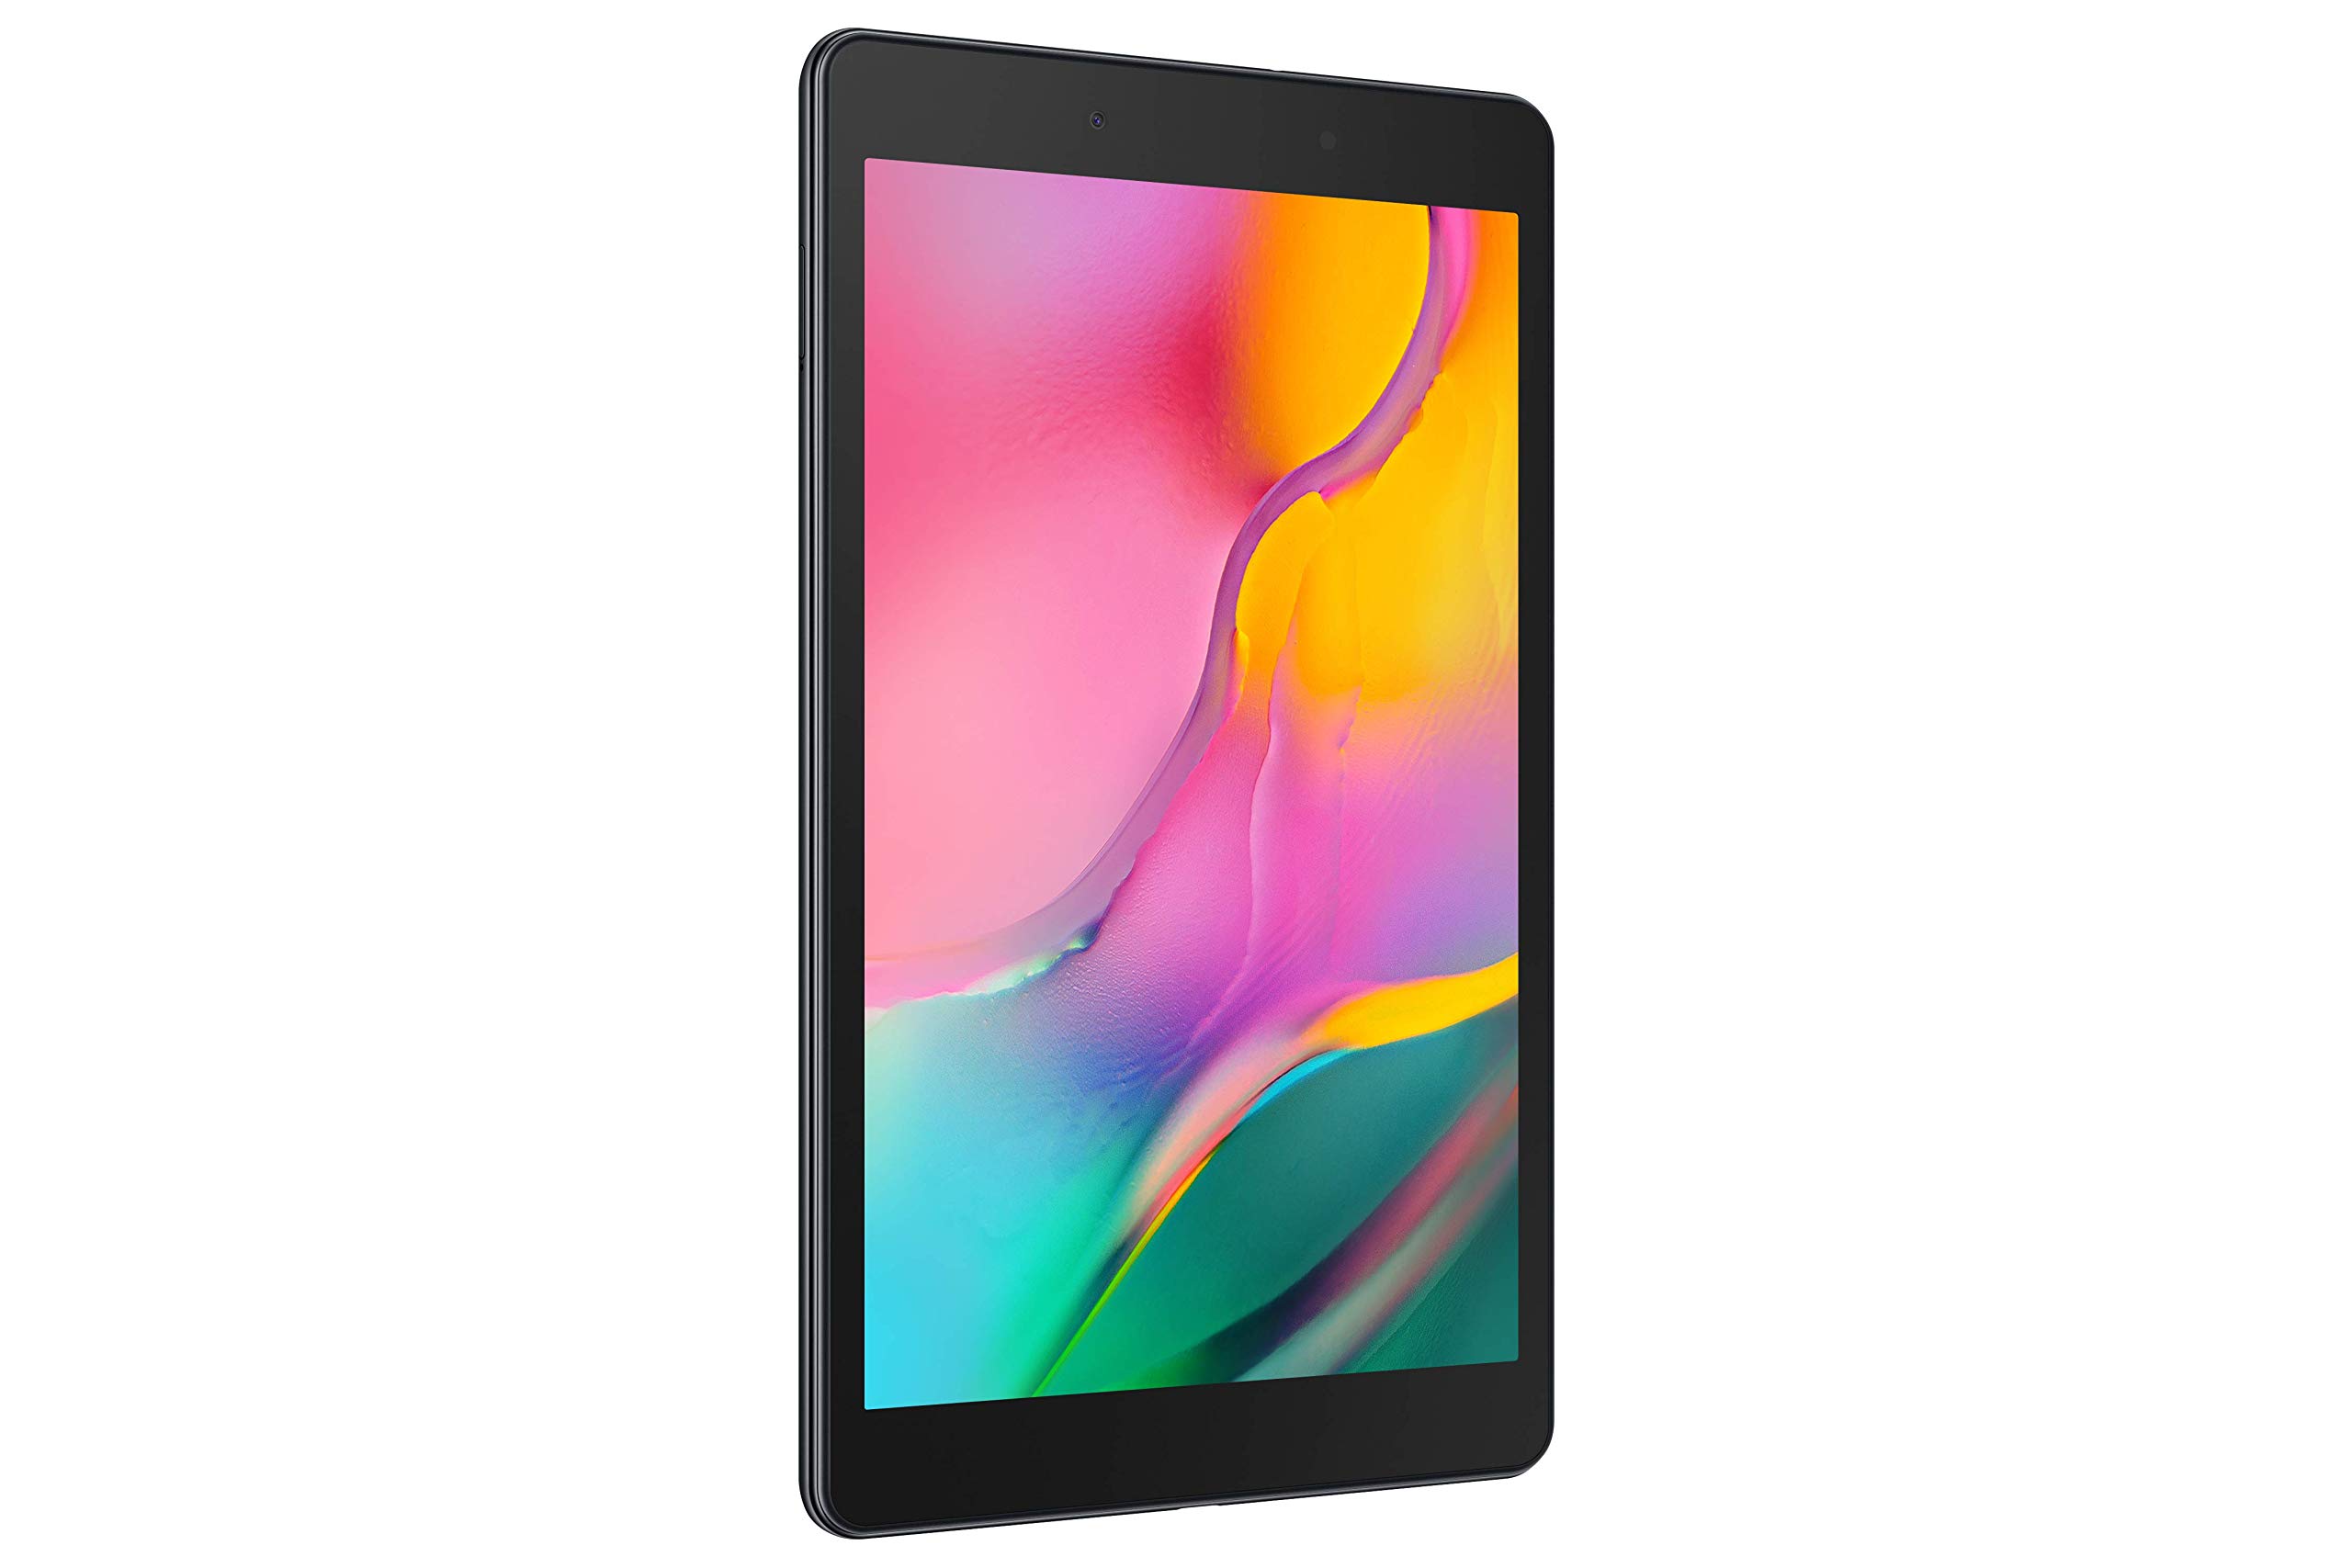 SAMSUNG Galaxy Tab A 8.0-inch Android Tablet 64GB Wi-Fi Lightweight Large Screen Feel Camera Long-Lasting Battery, Black